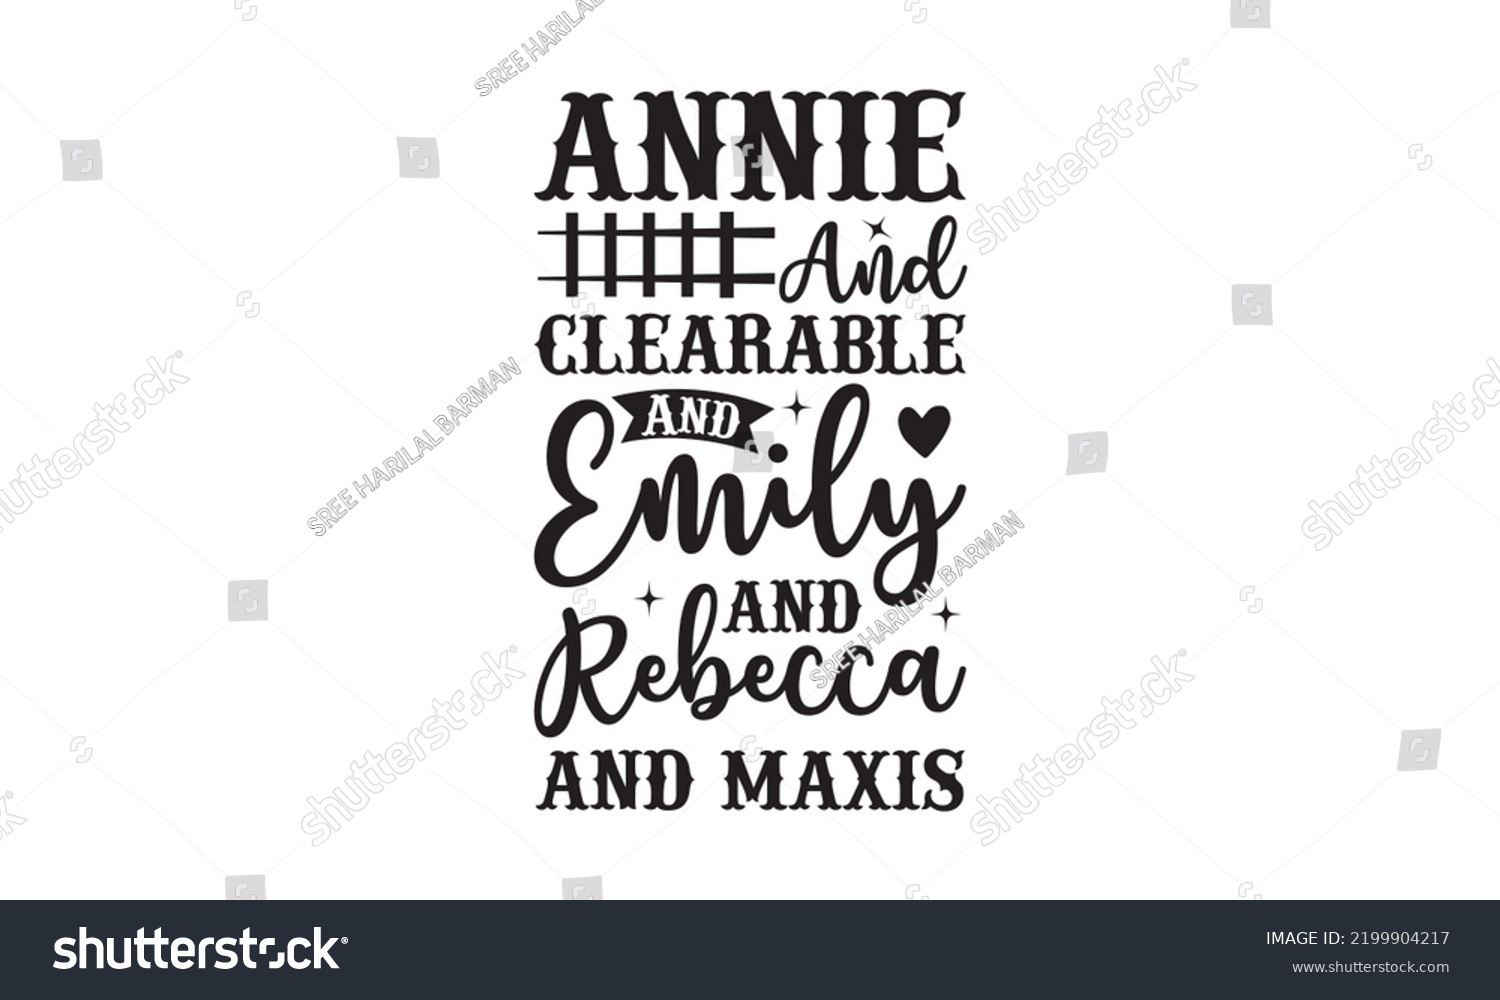 SVG of Annie and clearable and Emily and Rebecca and maxis - Train SVG t-shirt design, Hand drew lettering phrases, templet, Calligraphy graphic design, SVG Files for Cutting Cricut and Silhouette. Eps 10 svg